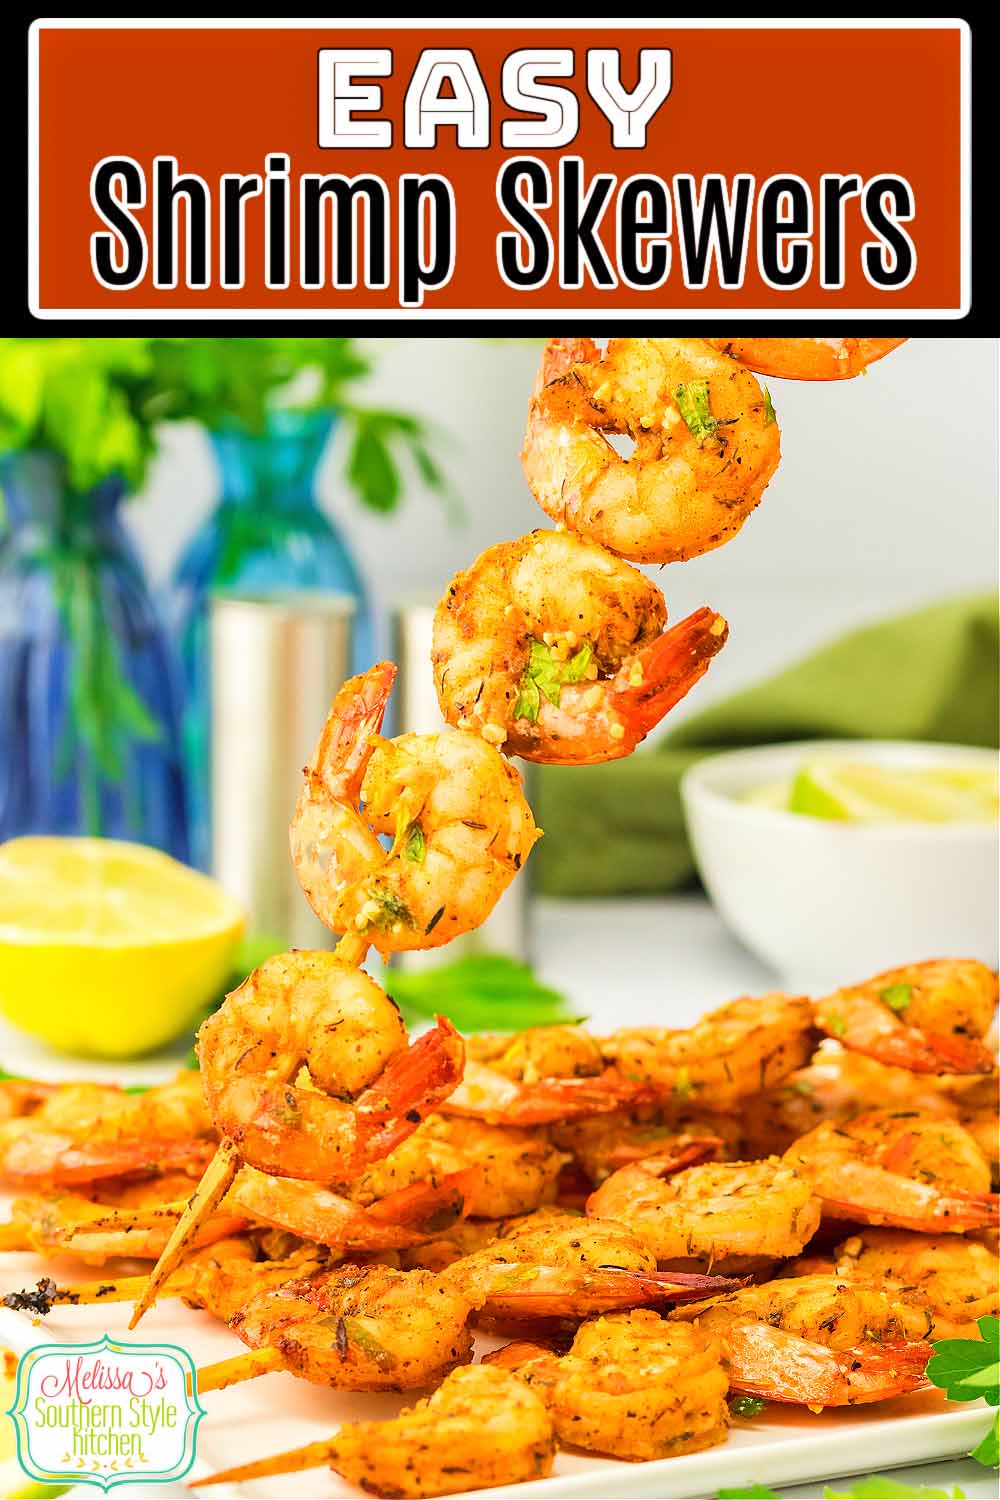 These garlic butter basted Shrimp Skewers feature a homemade Cajun seasoning blend that's packed with flavor. #shrimpskewers #shrimprecipes #easyshrimprecipes #cajunshrimp #cajunseasoning #bakedshrimp #shrimpkabobs